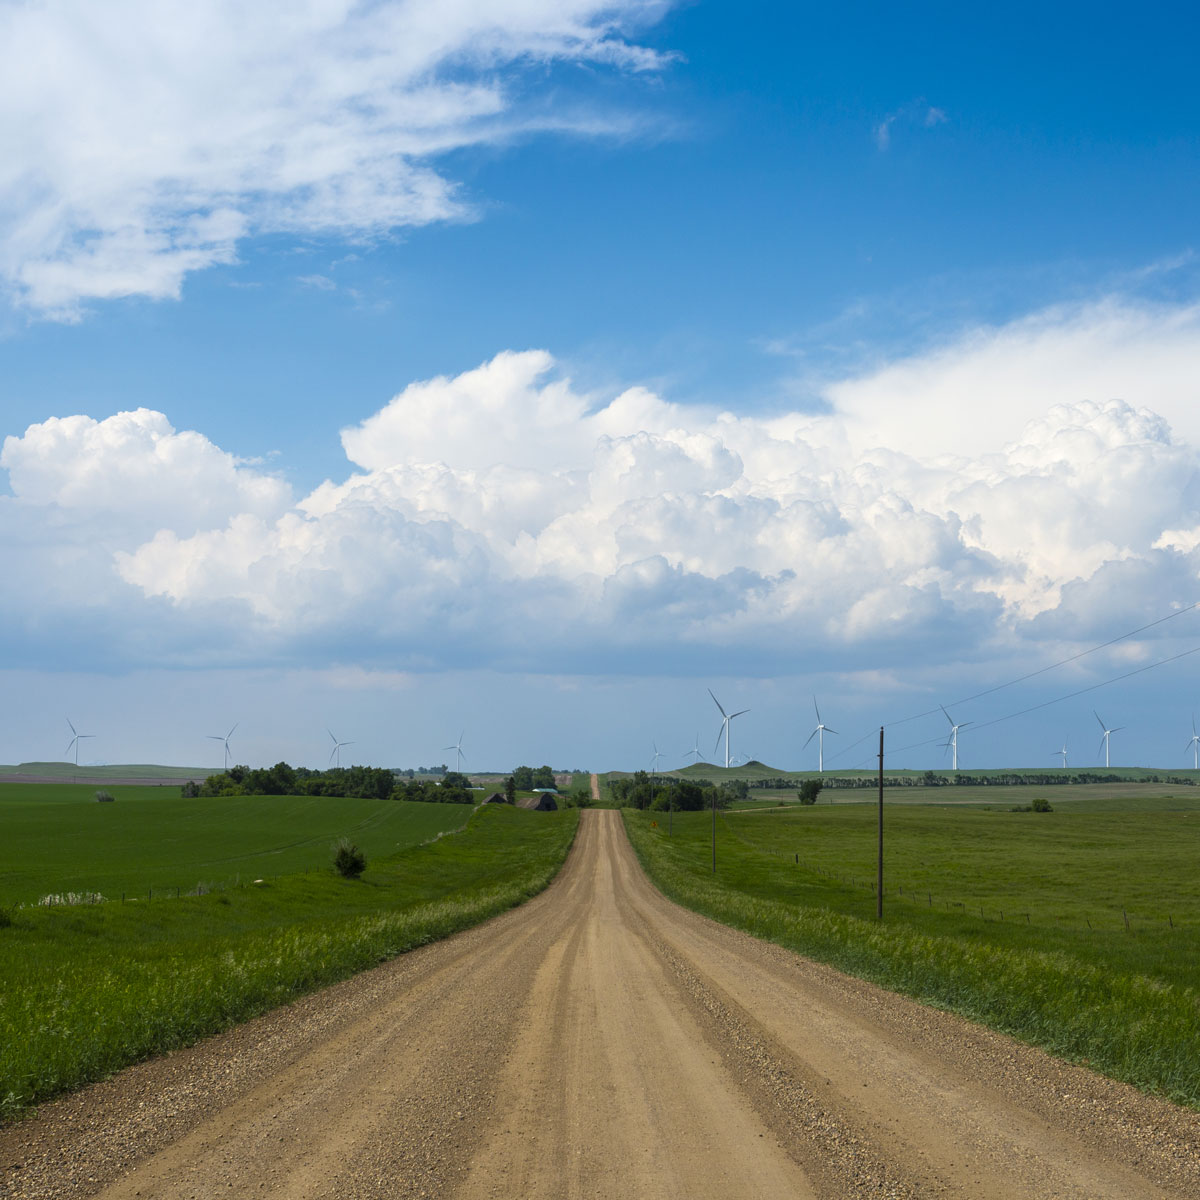 A thunderstorm cloud approaches on the horizon on a country dirt road leading through lush green prairie with wind turbines in the distance.